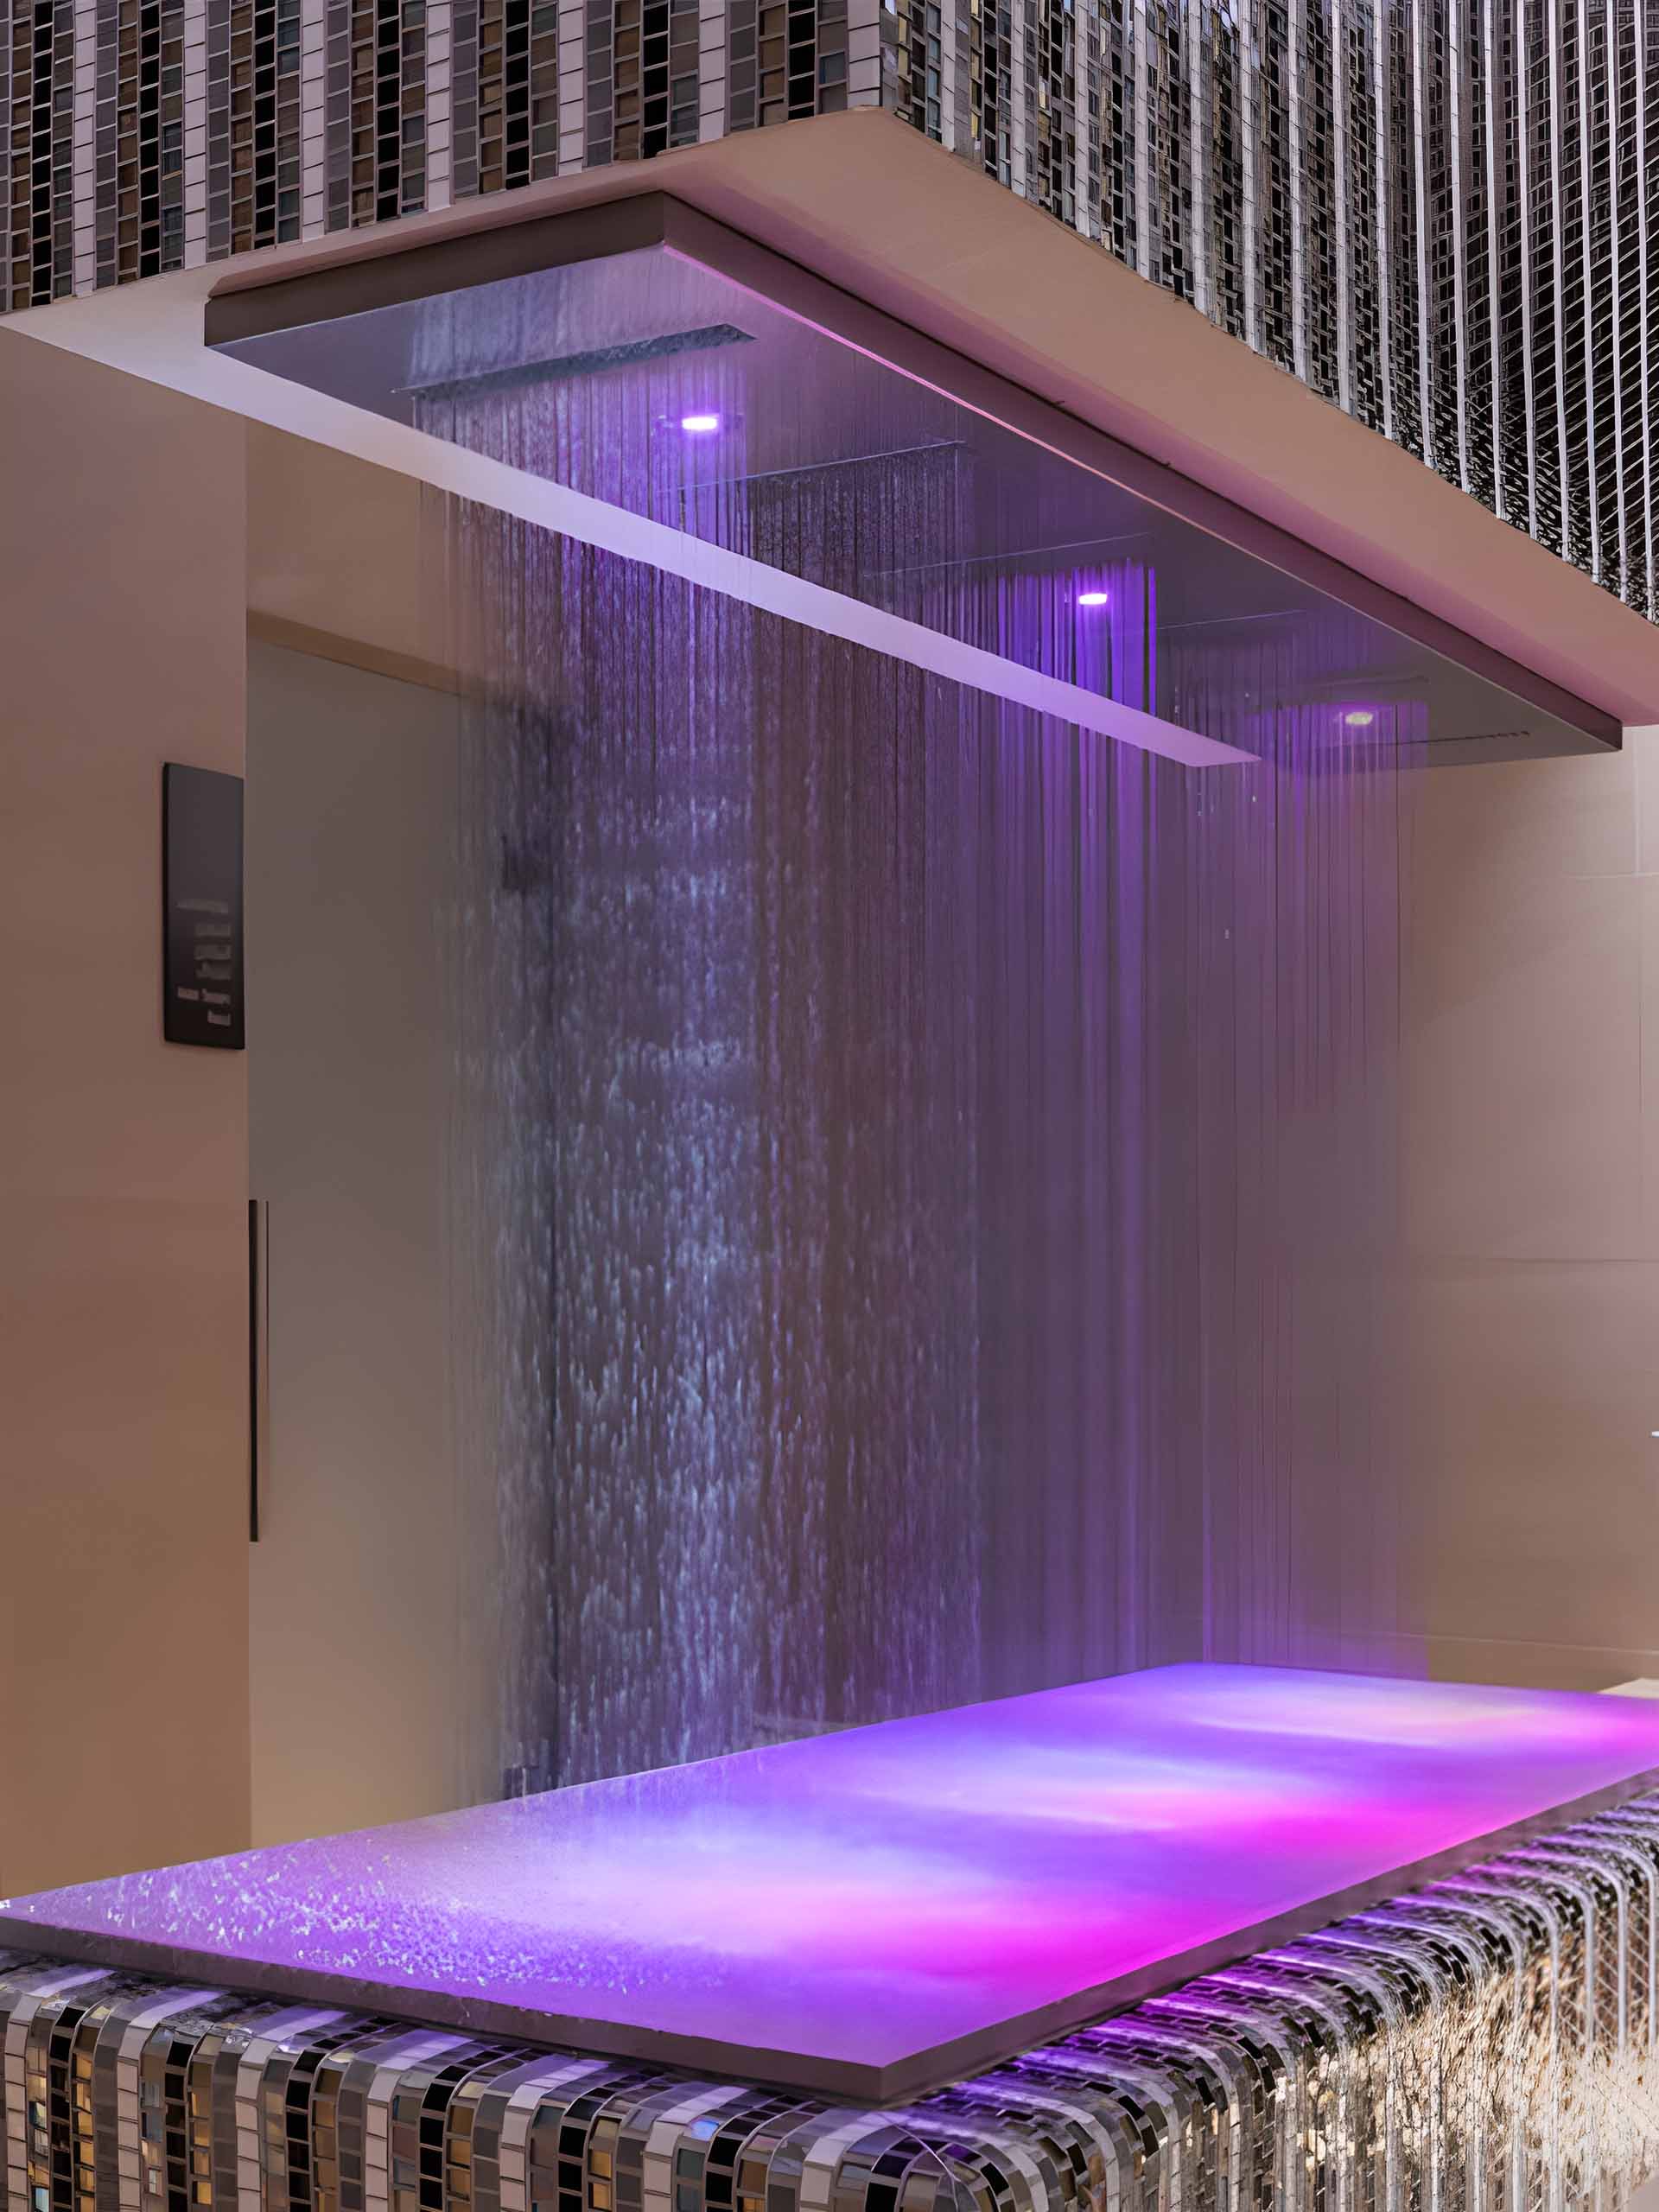 nbeatable cost-effective shower systems by Wassenaar.